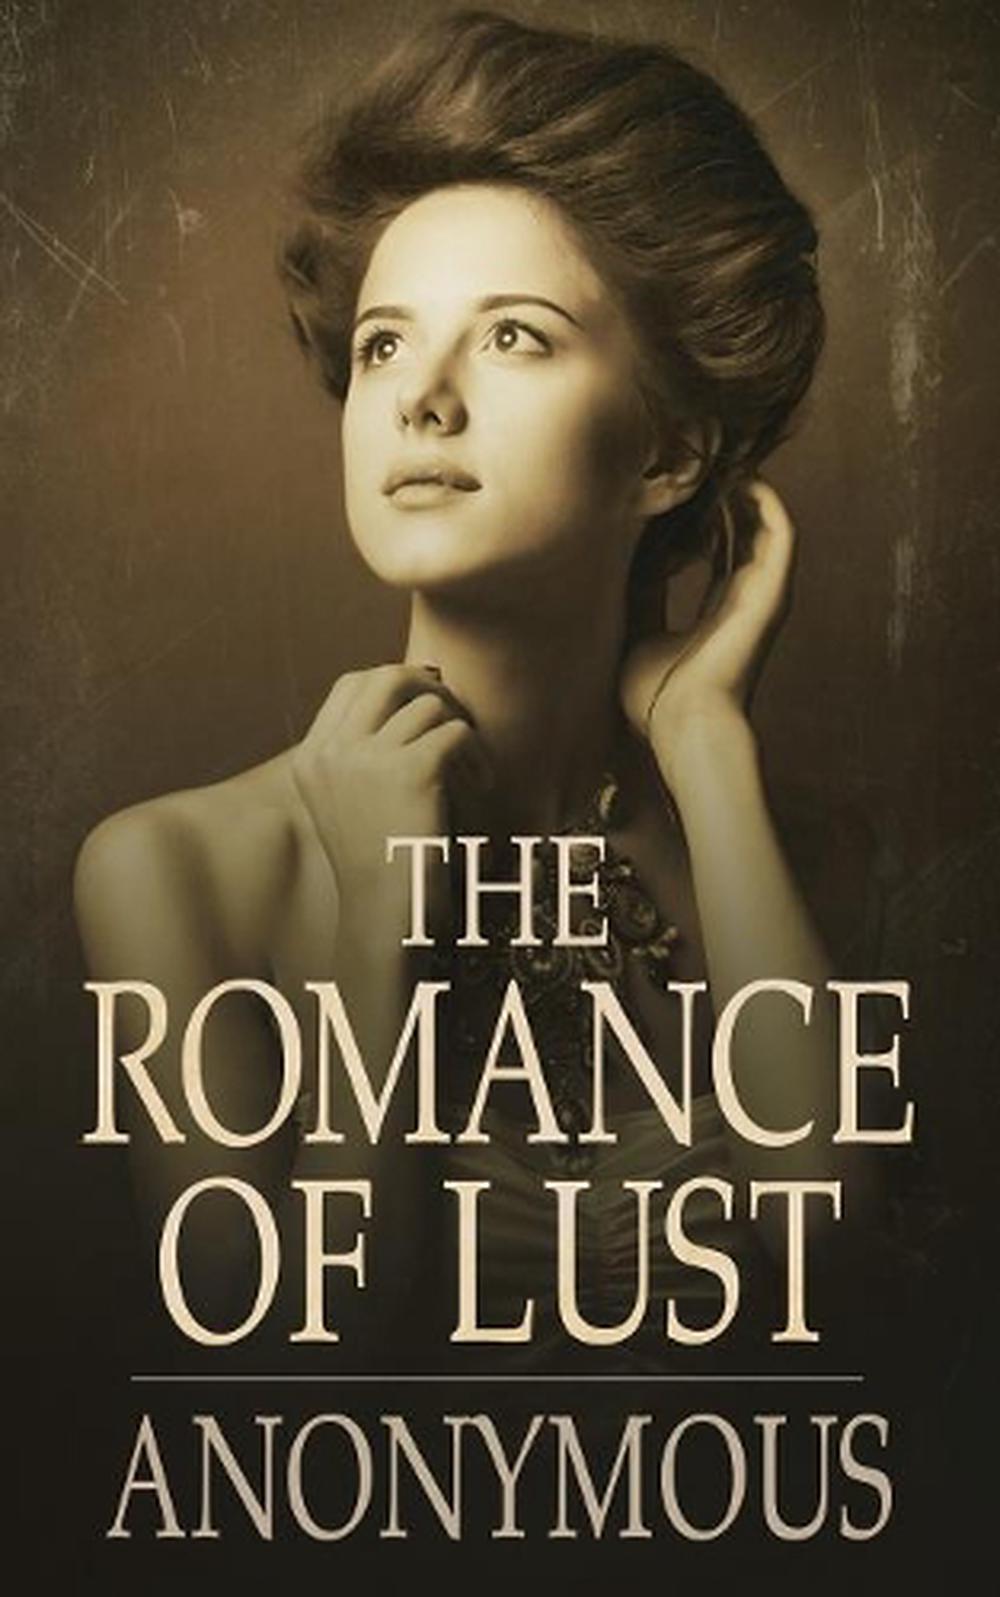 book of lust wiki